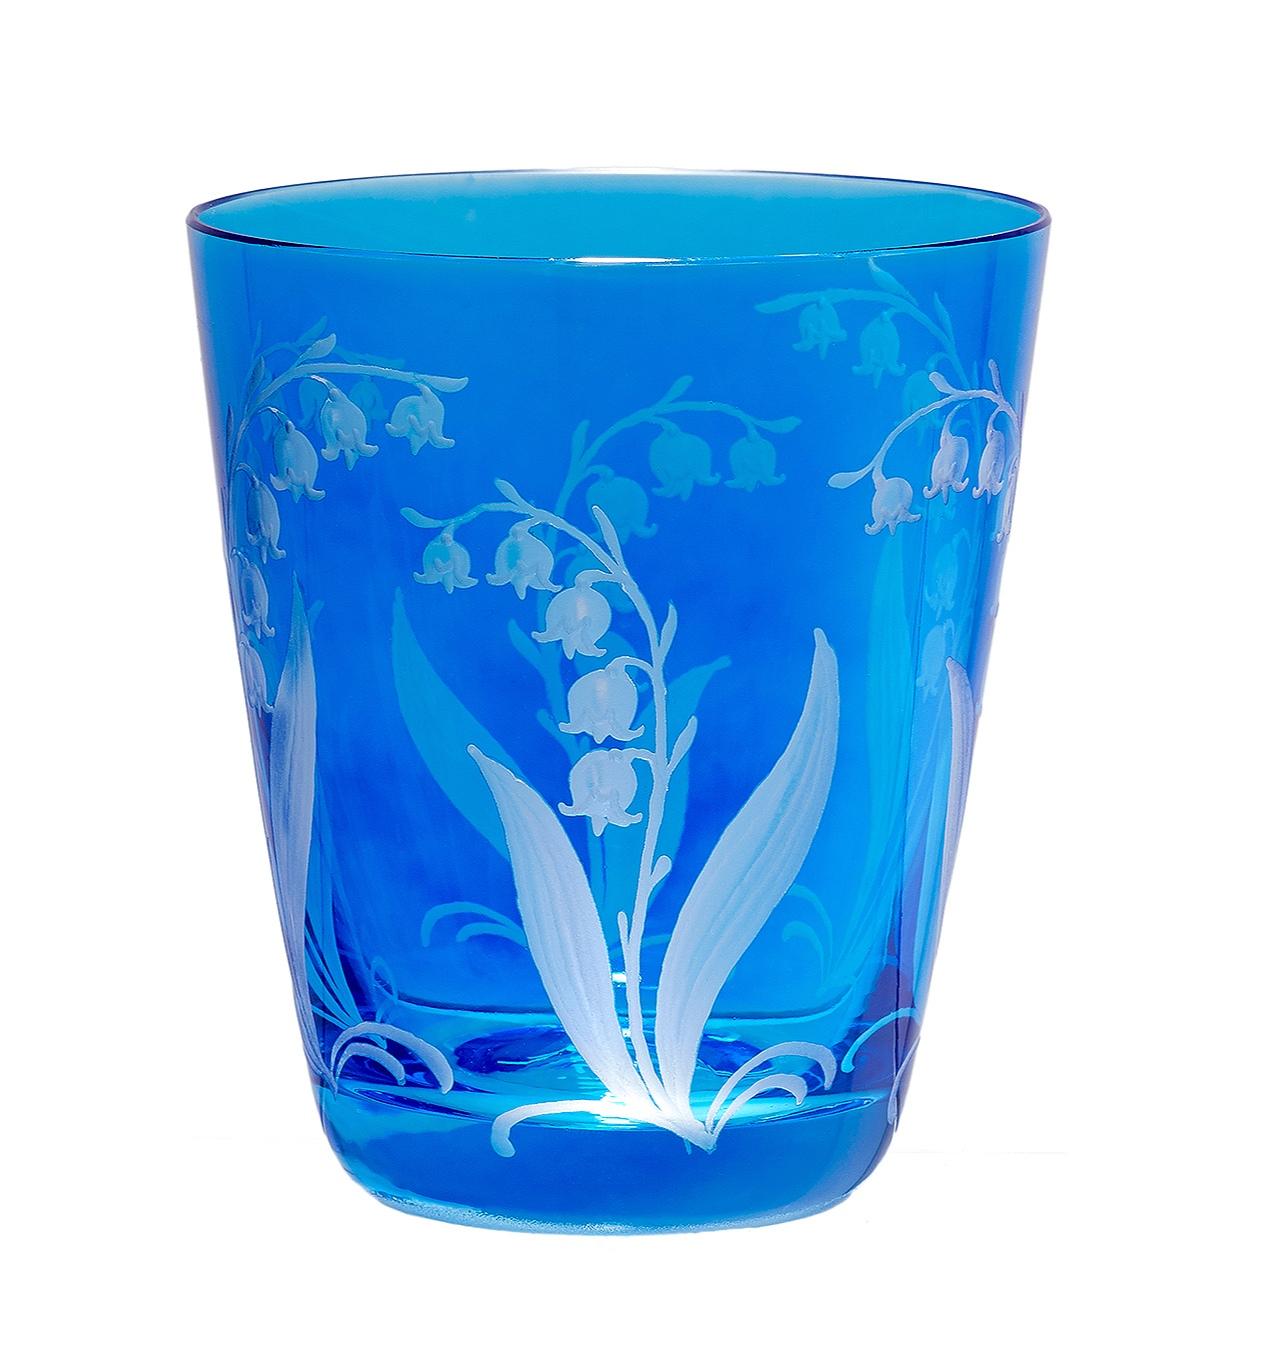 Hand blown carafe in blue crystal with a charming lily of the valley decor all around.
About Sofina crystal:
Sofina crystal was established in 2013 in Bavaria/Germany and stands for traditional craftsmanship in the tradition of the 18th century.